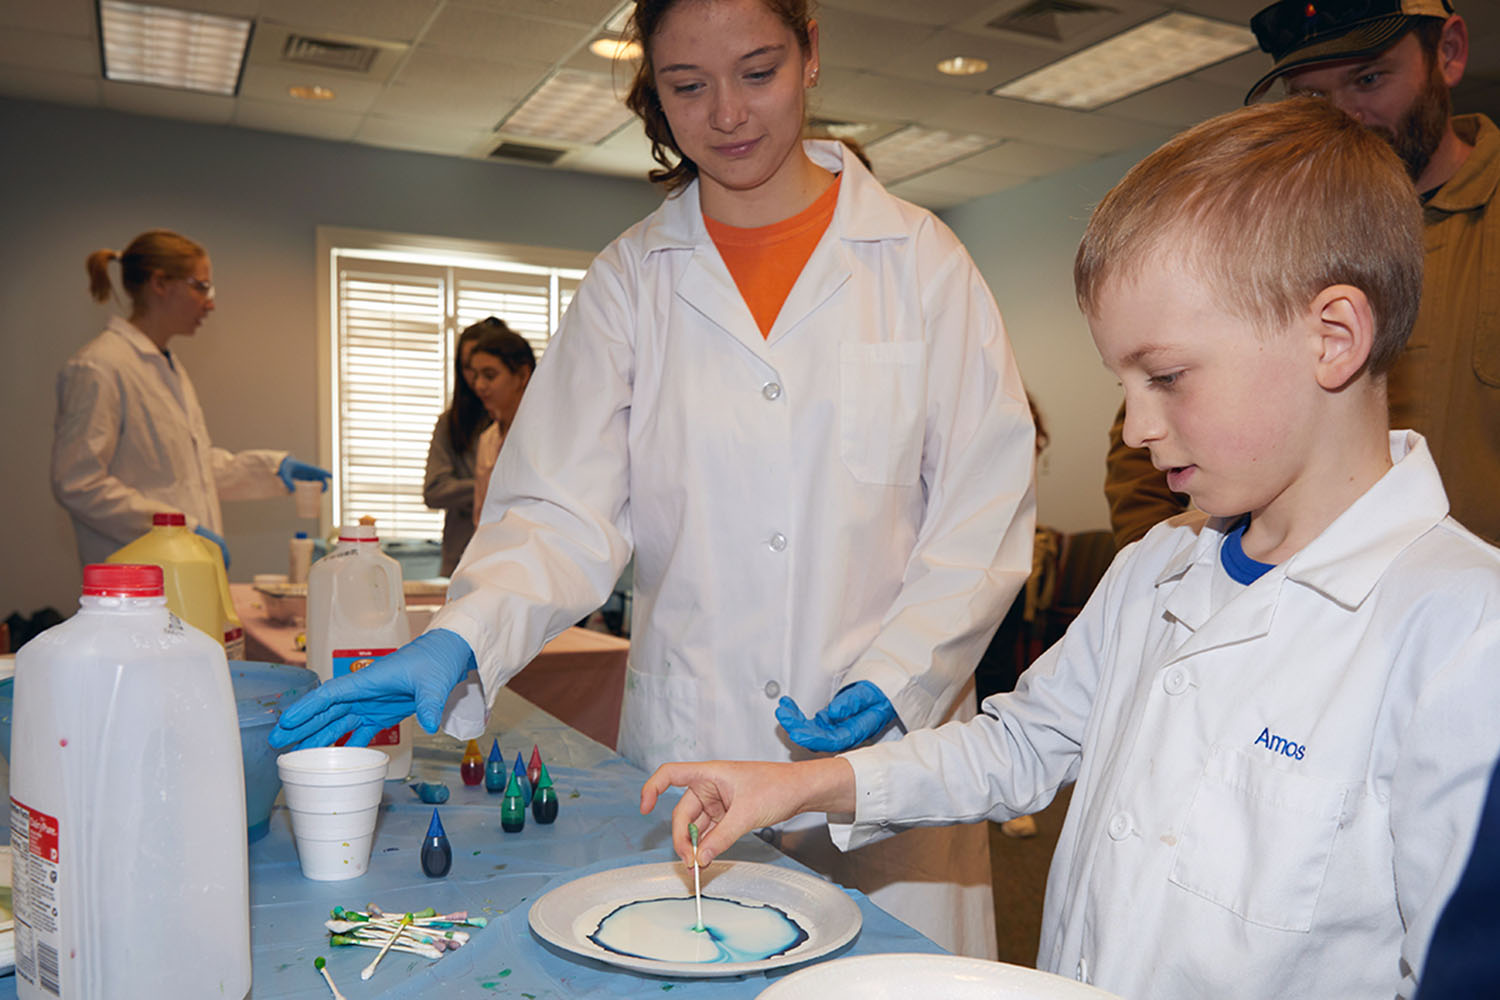 Girl and young boy conducting science experiment.